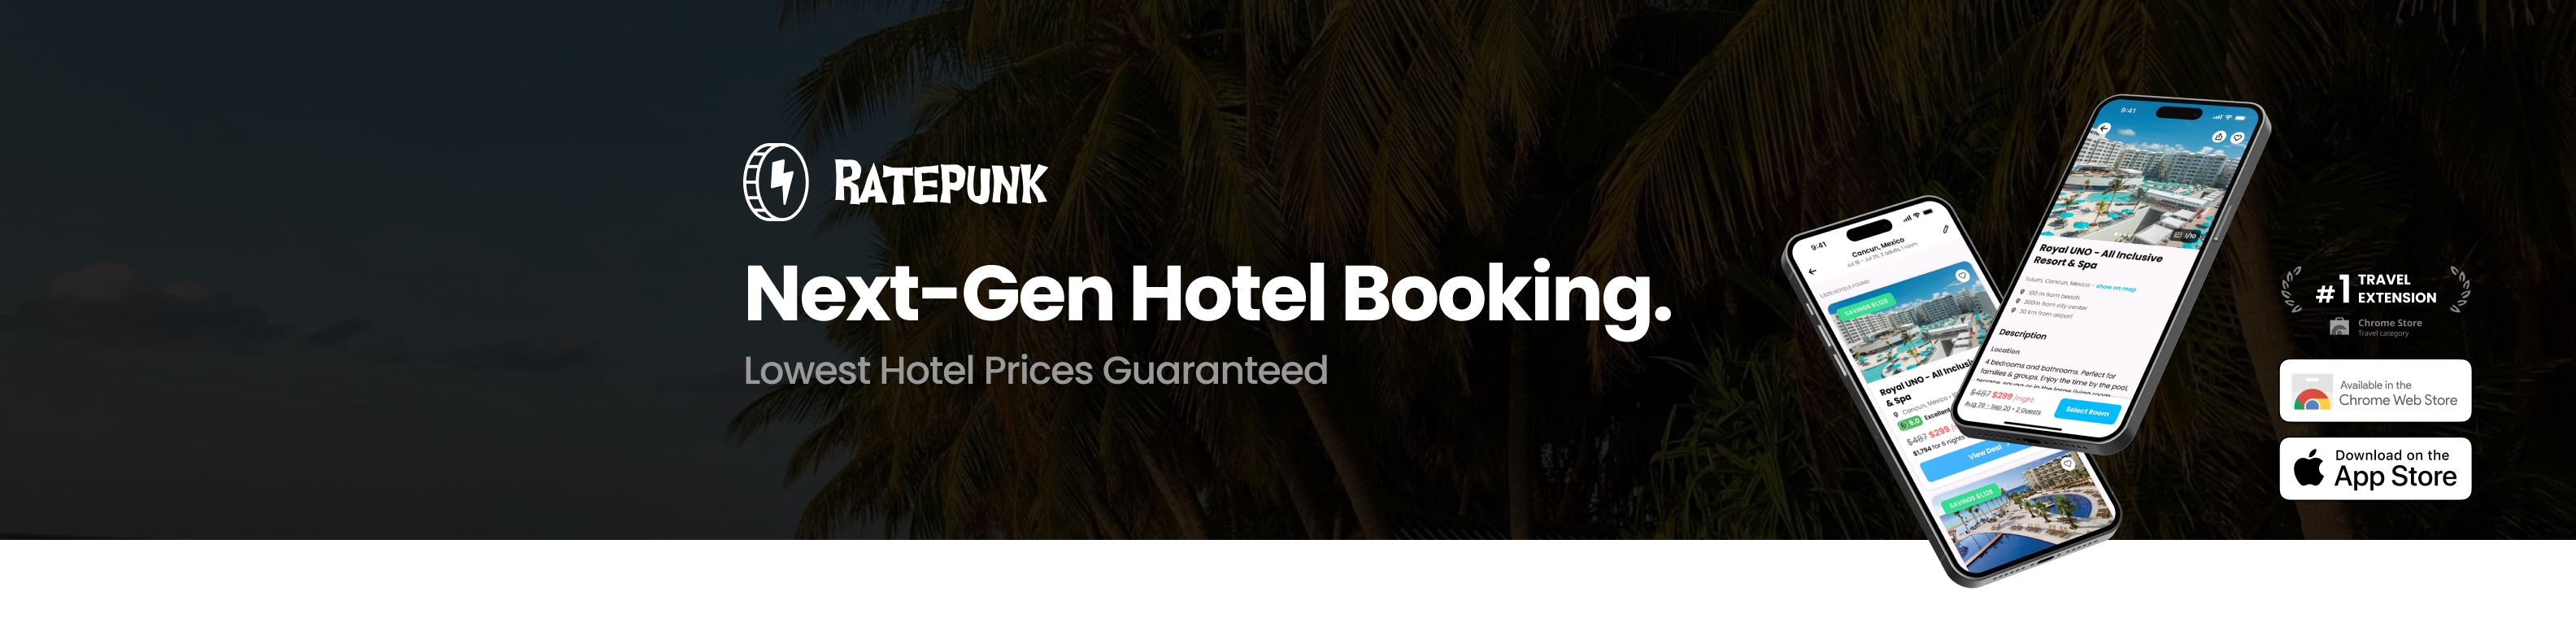 ratepunk browser extension and iOs app finds best hotel prices and gives other perks travel would love . travel cheap. 